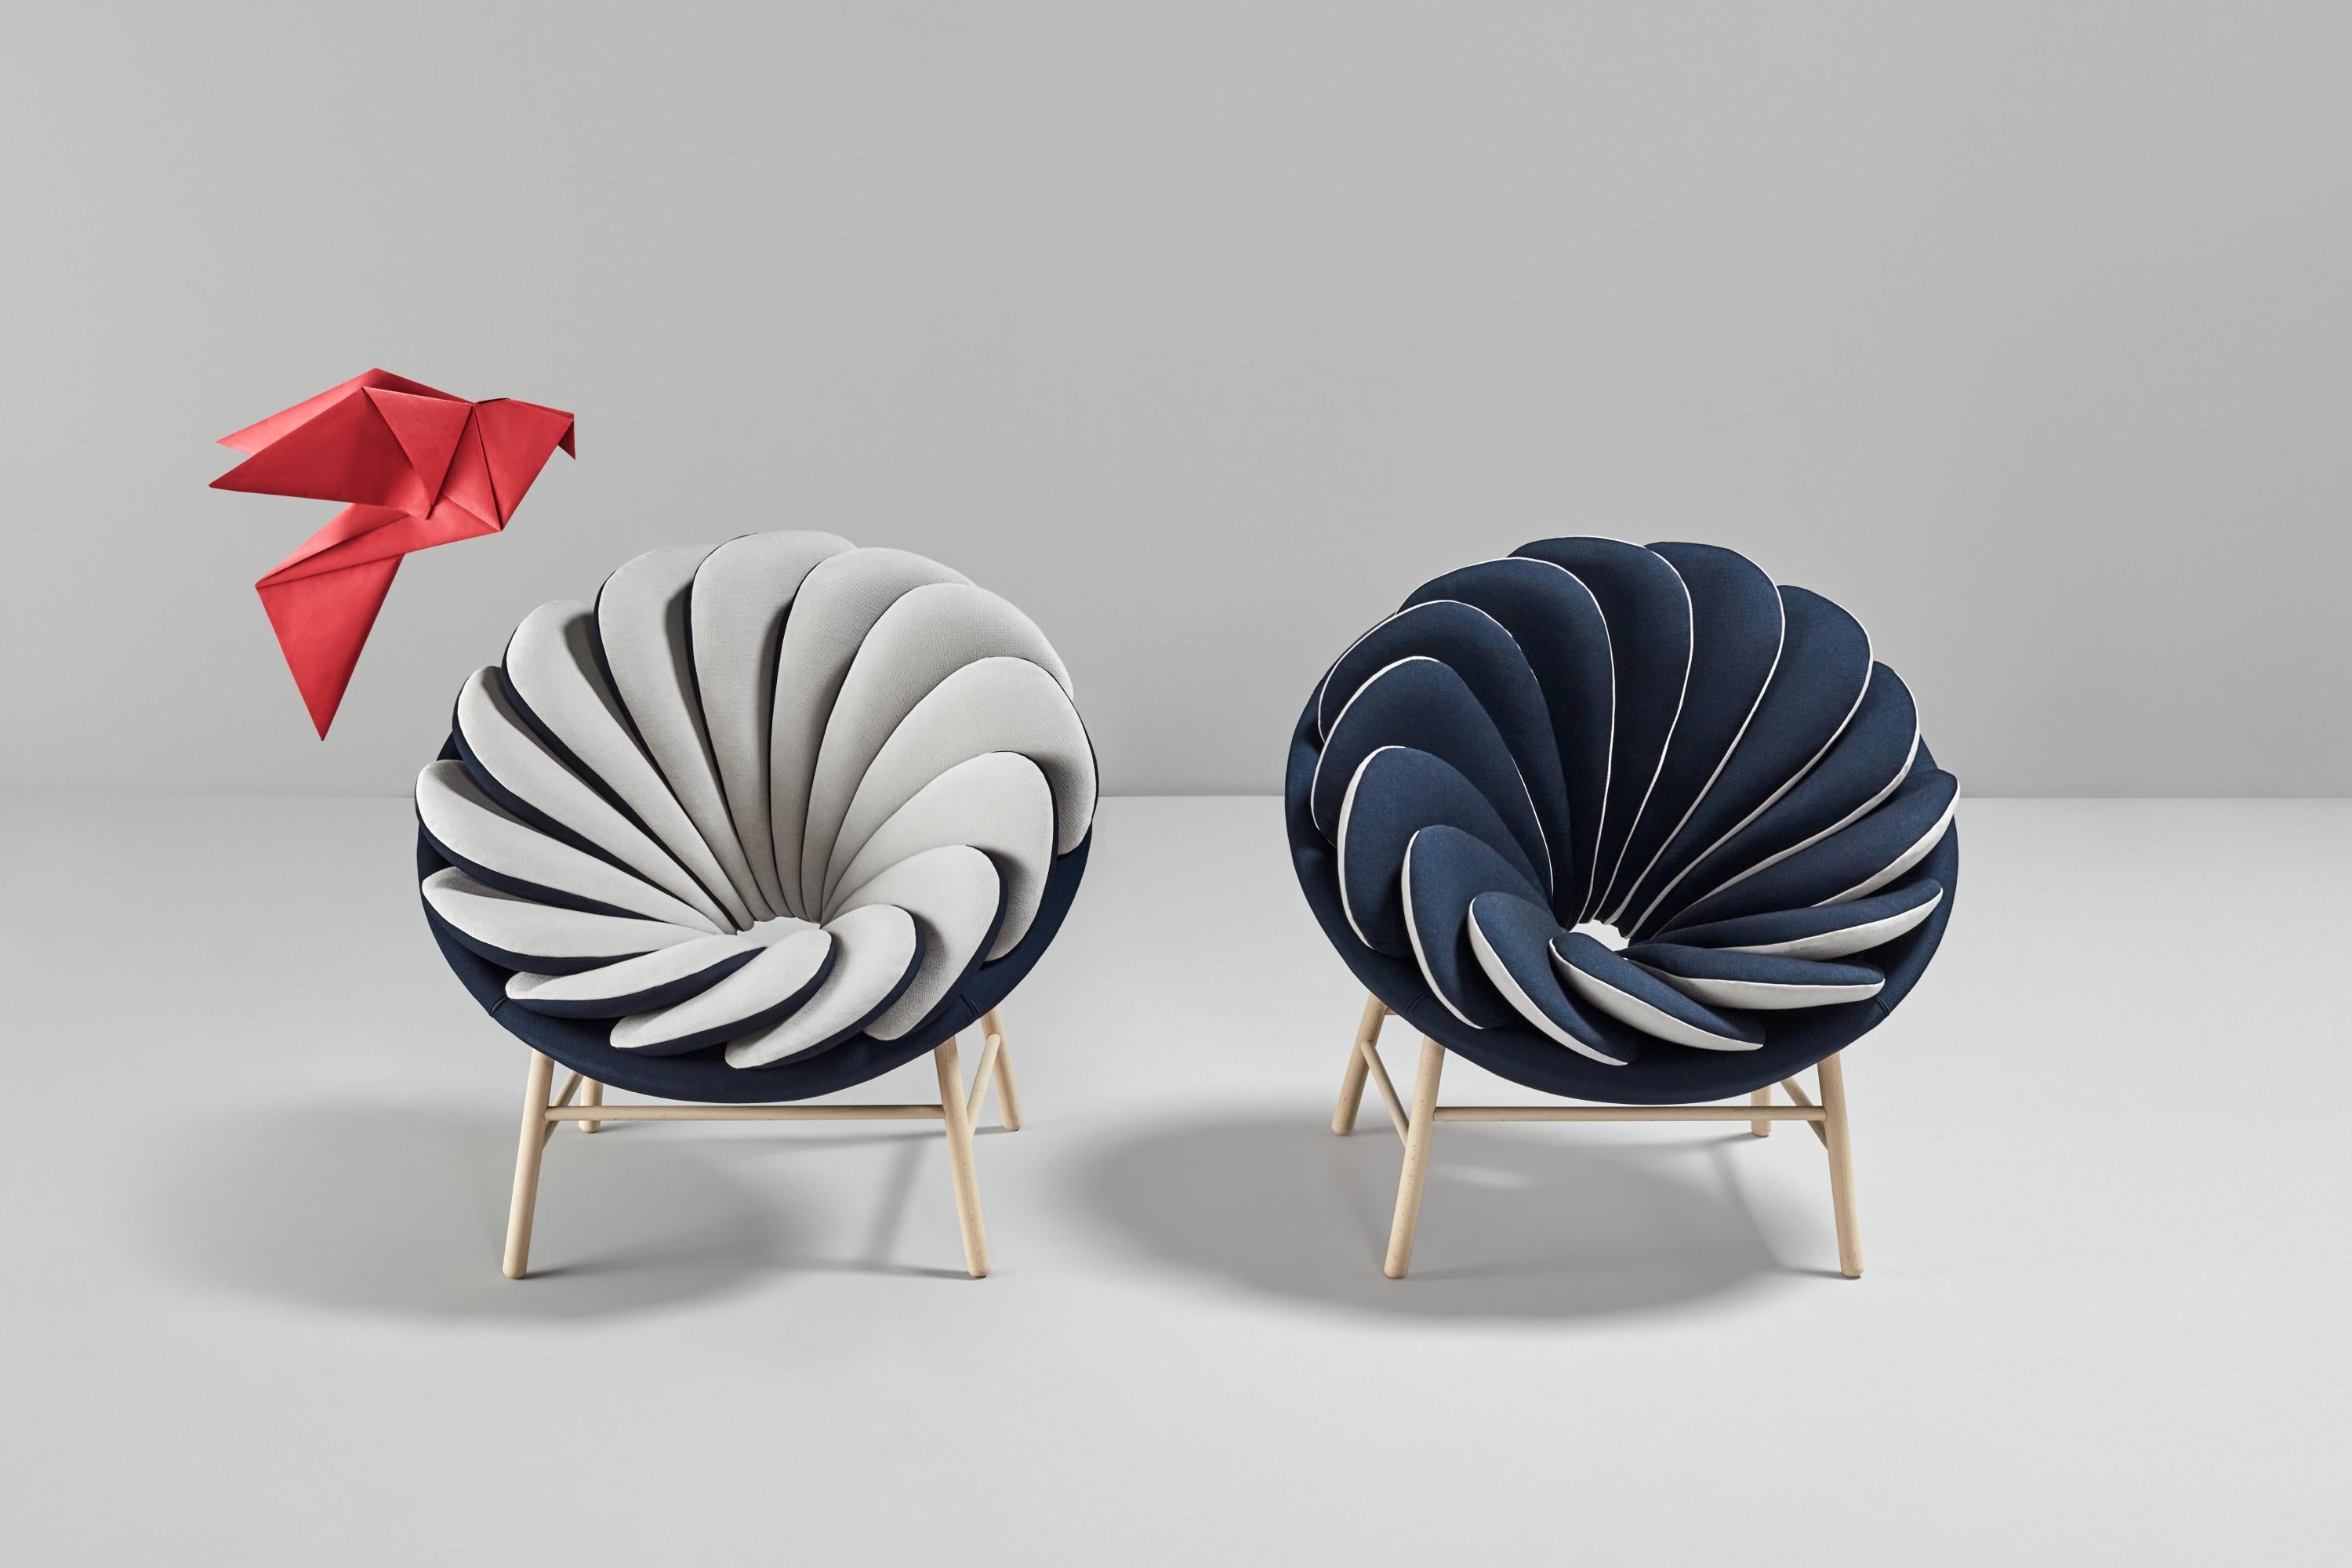 Set of 2 Quetzal Armchairs, Gray and Blue by Pepe Albargues
Dimensions: W100, D100, H90, Seat 42
Materials: Iron structure
Foam CMHR (high resilience and flame retardant) for all our cushion filling systems
Wooden legs

Quetzal is a very visual